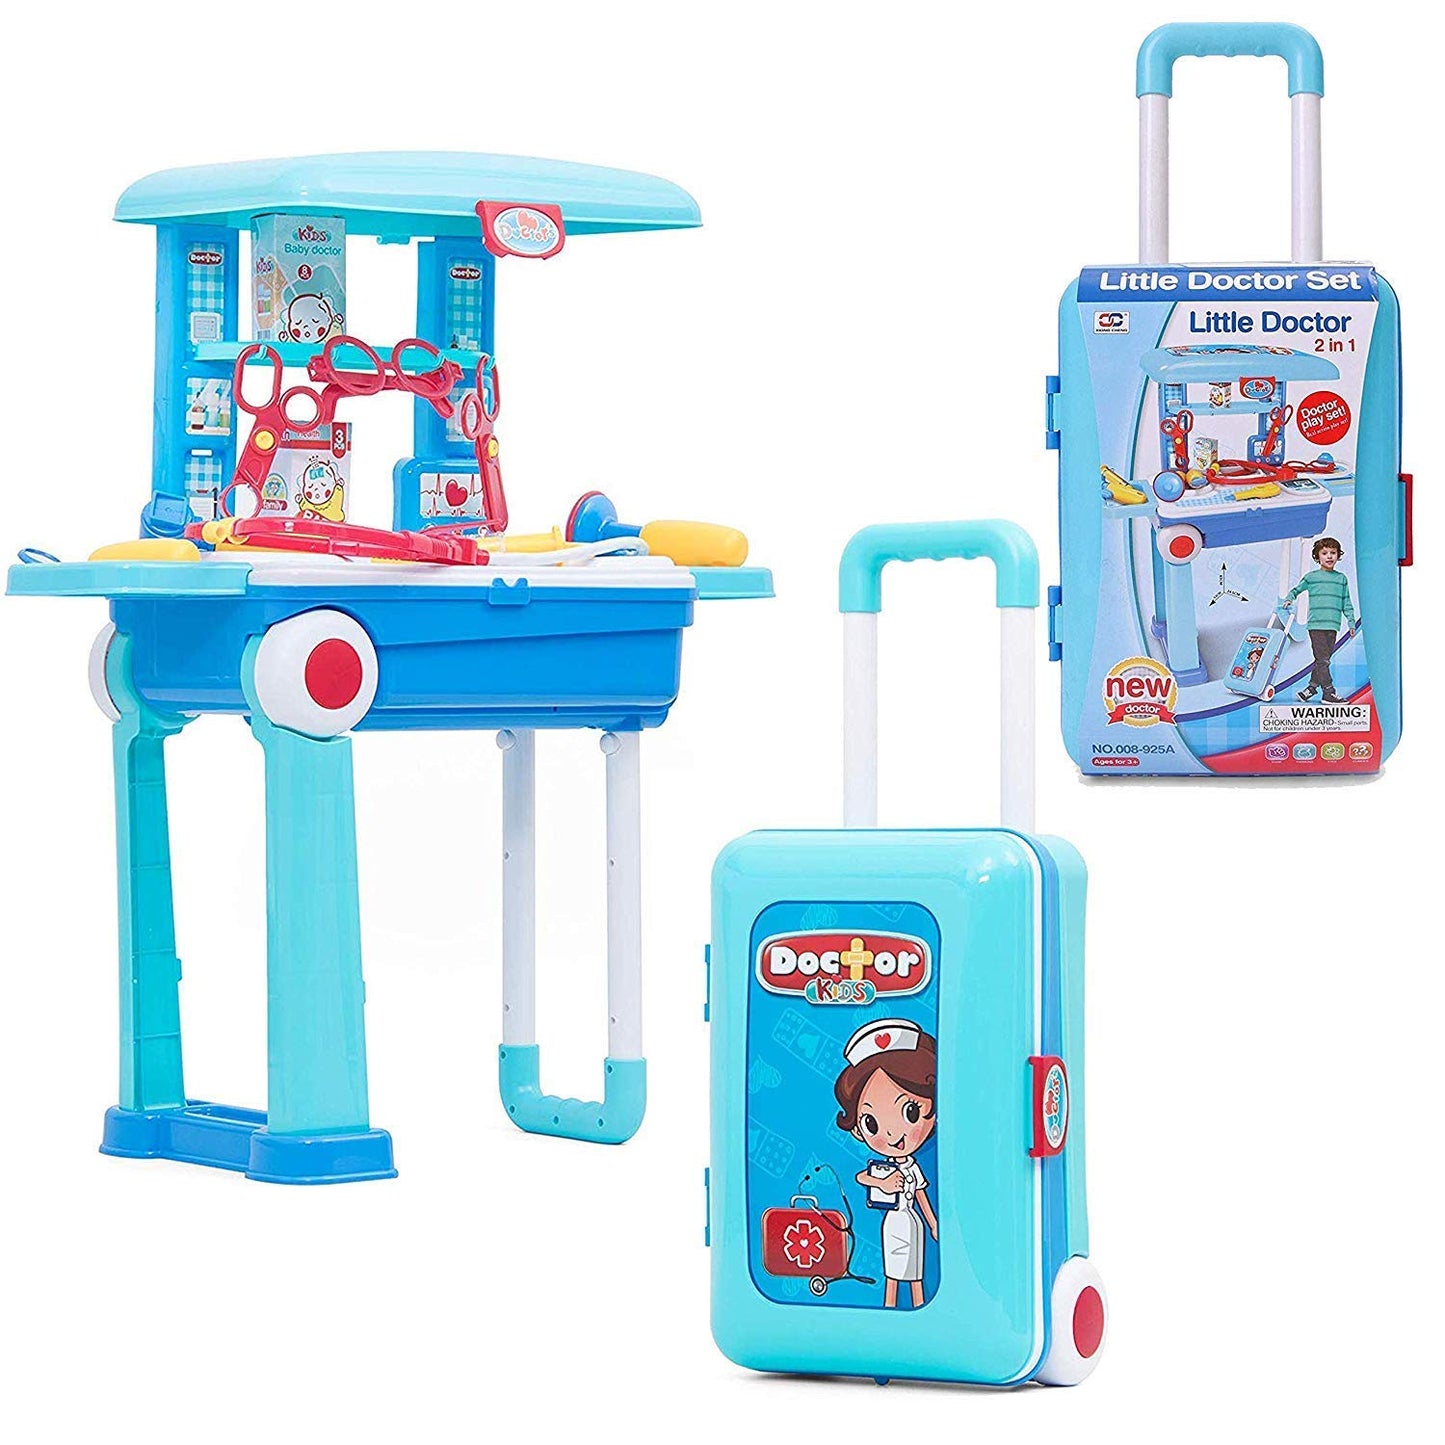 Funrally® Little Doctor's Bring Along Medical Clinic Suitcase 2in1, Doctor Set Play Toy, Role Toy for Kids with Briefcase in a Trolley Equipment Doctors and Foldable with Wheels, Premium Quality